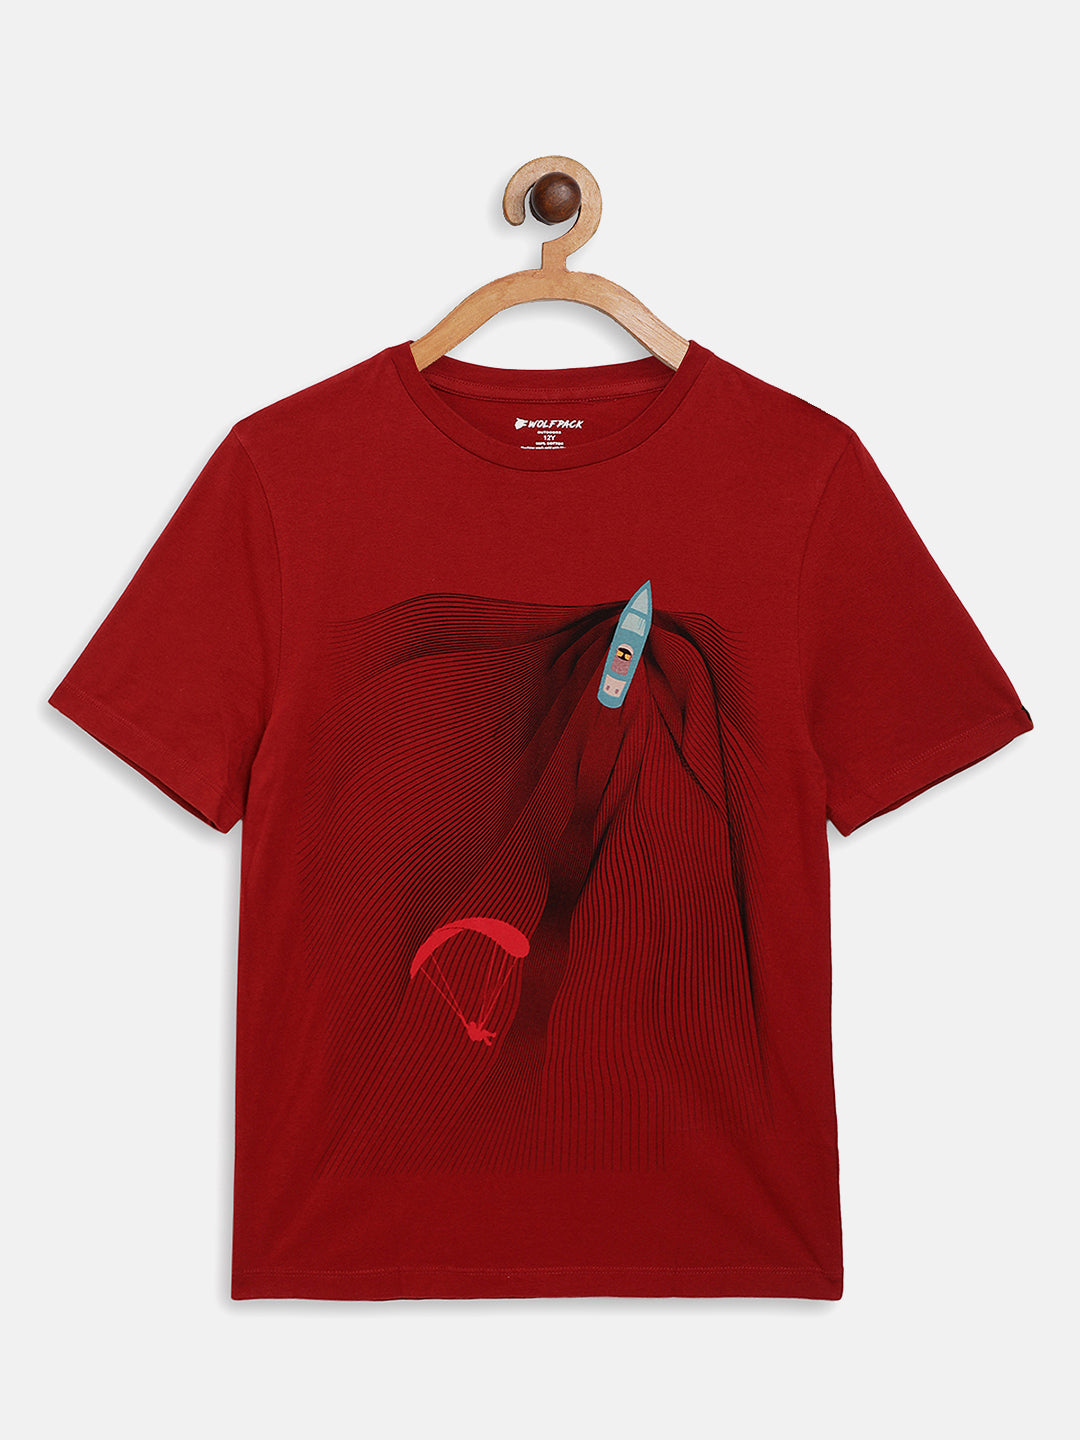 Wolfpack Boys Red Parasailing Printed T-Shirt Wolfpack